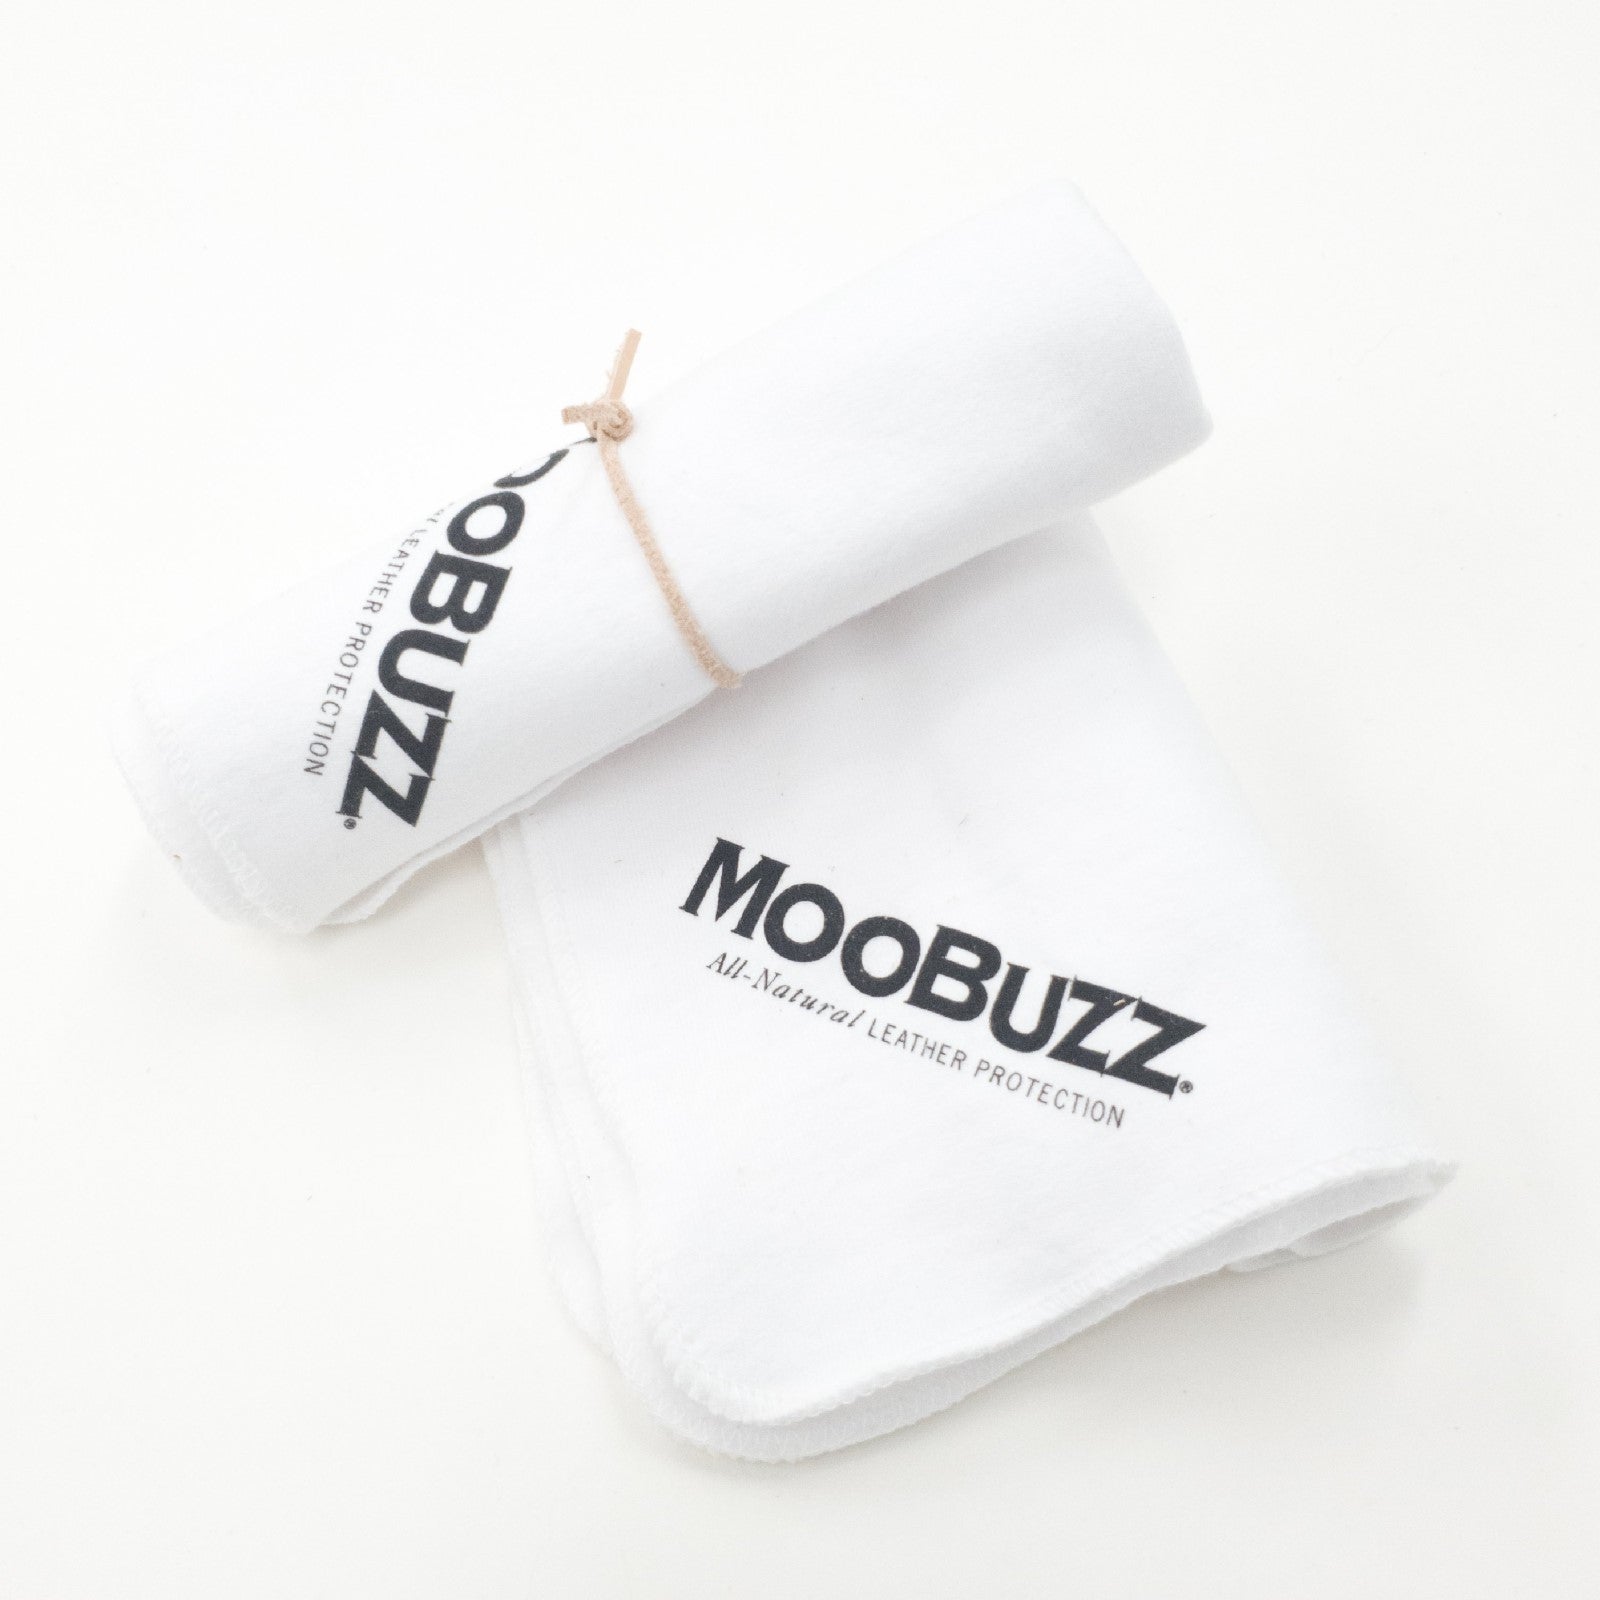 MooBuzz All-Natural Leather Protection, Shine Cloth | The Leather Guy